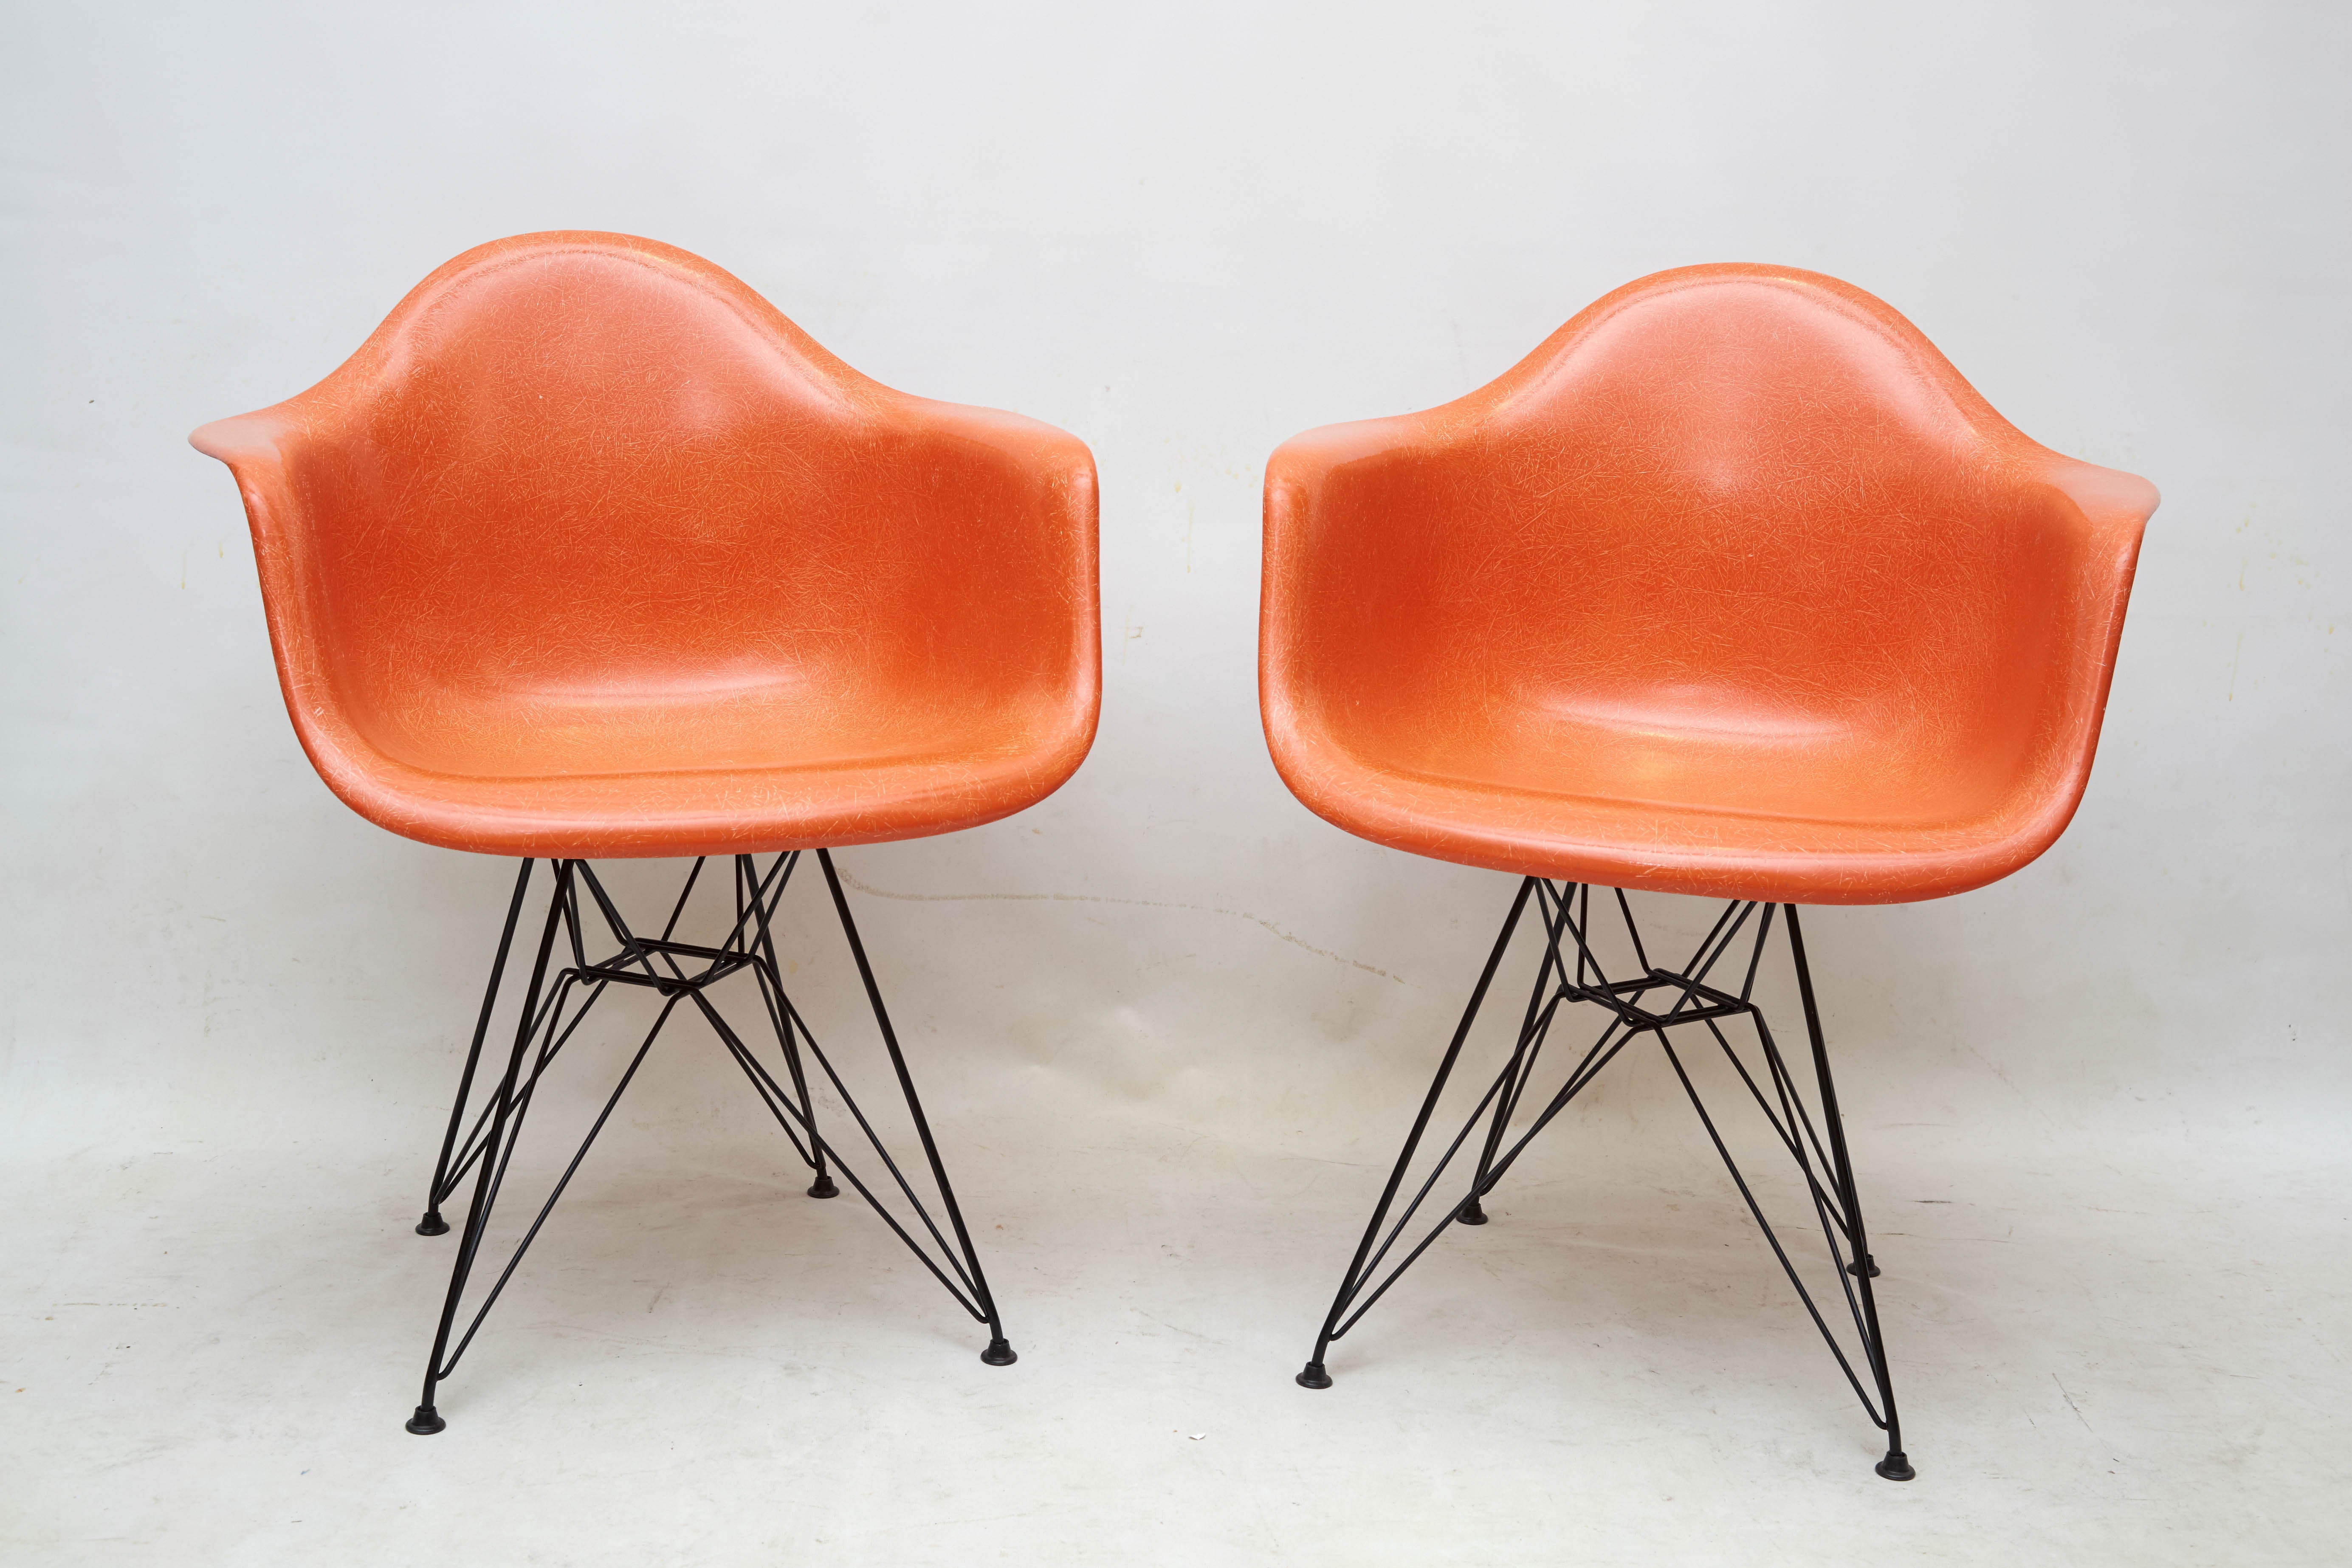 Pair of Early Charles Eames for Herman Miller Fiberglass Lounge Chairs